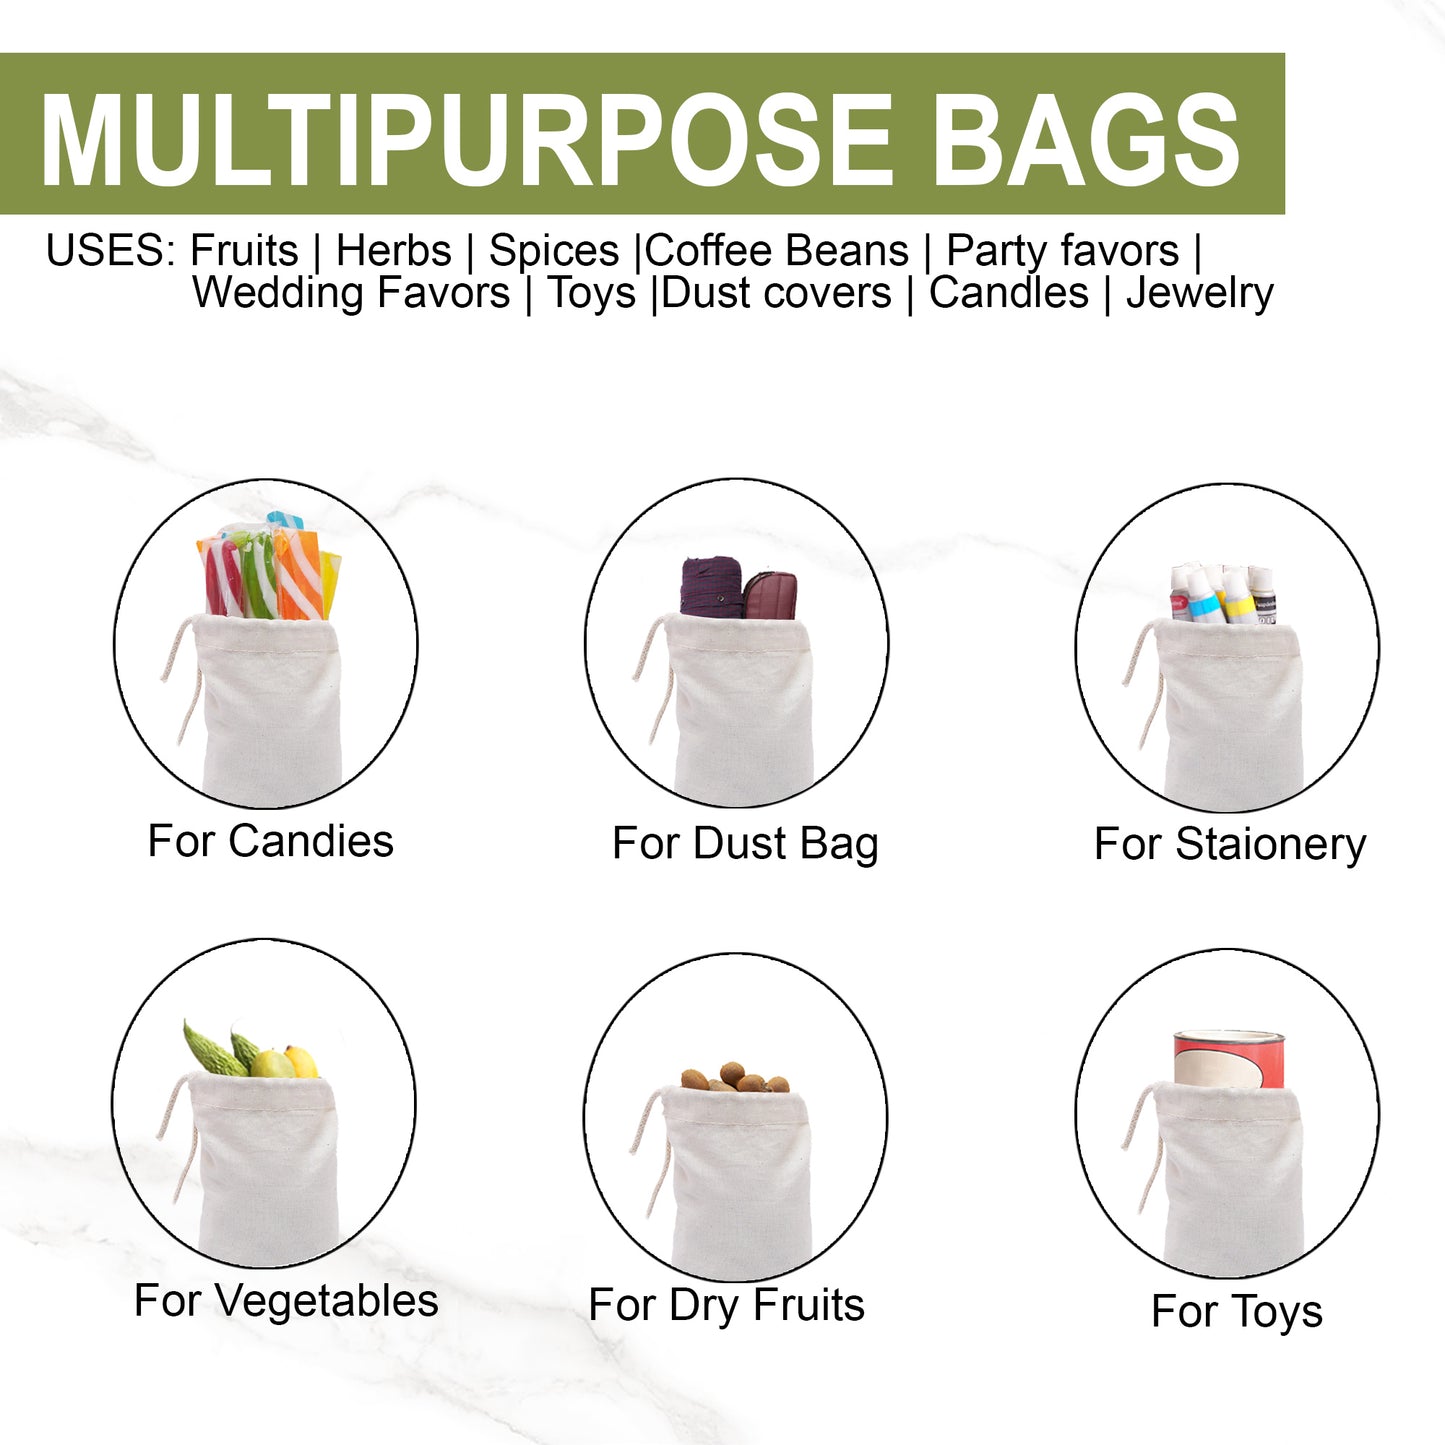 2x3 Inches Reusable Eco-Friendly Cotton Single Drawstring Bags Natural Color